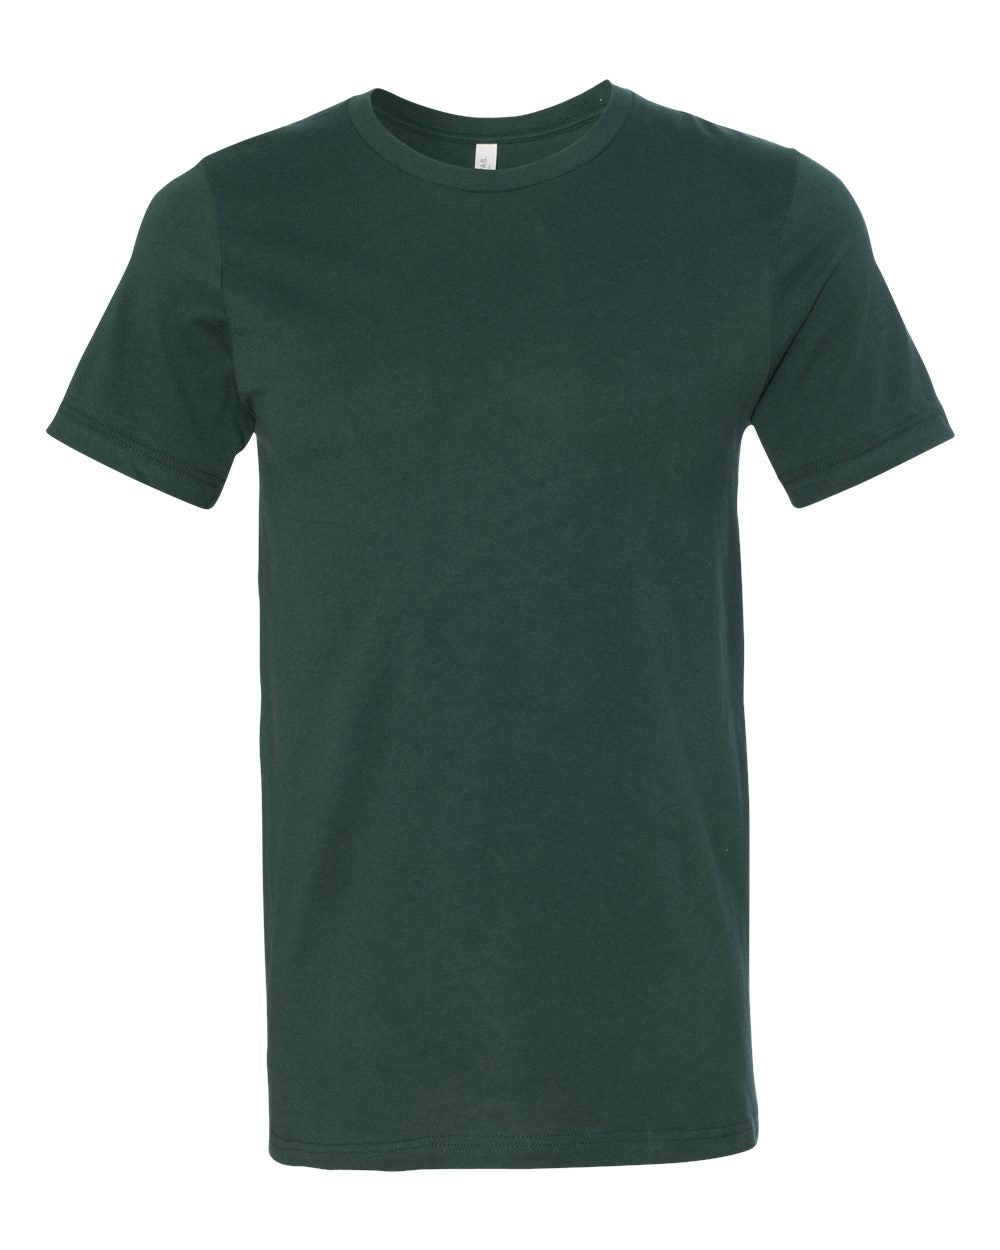 bella+canvas adult short sleeve tee forest green